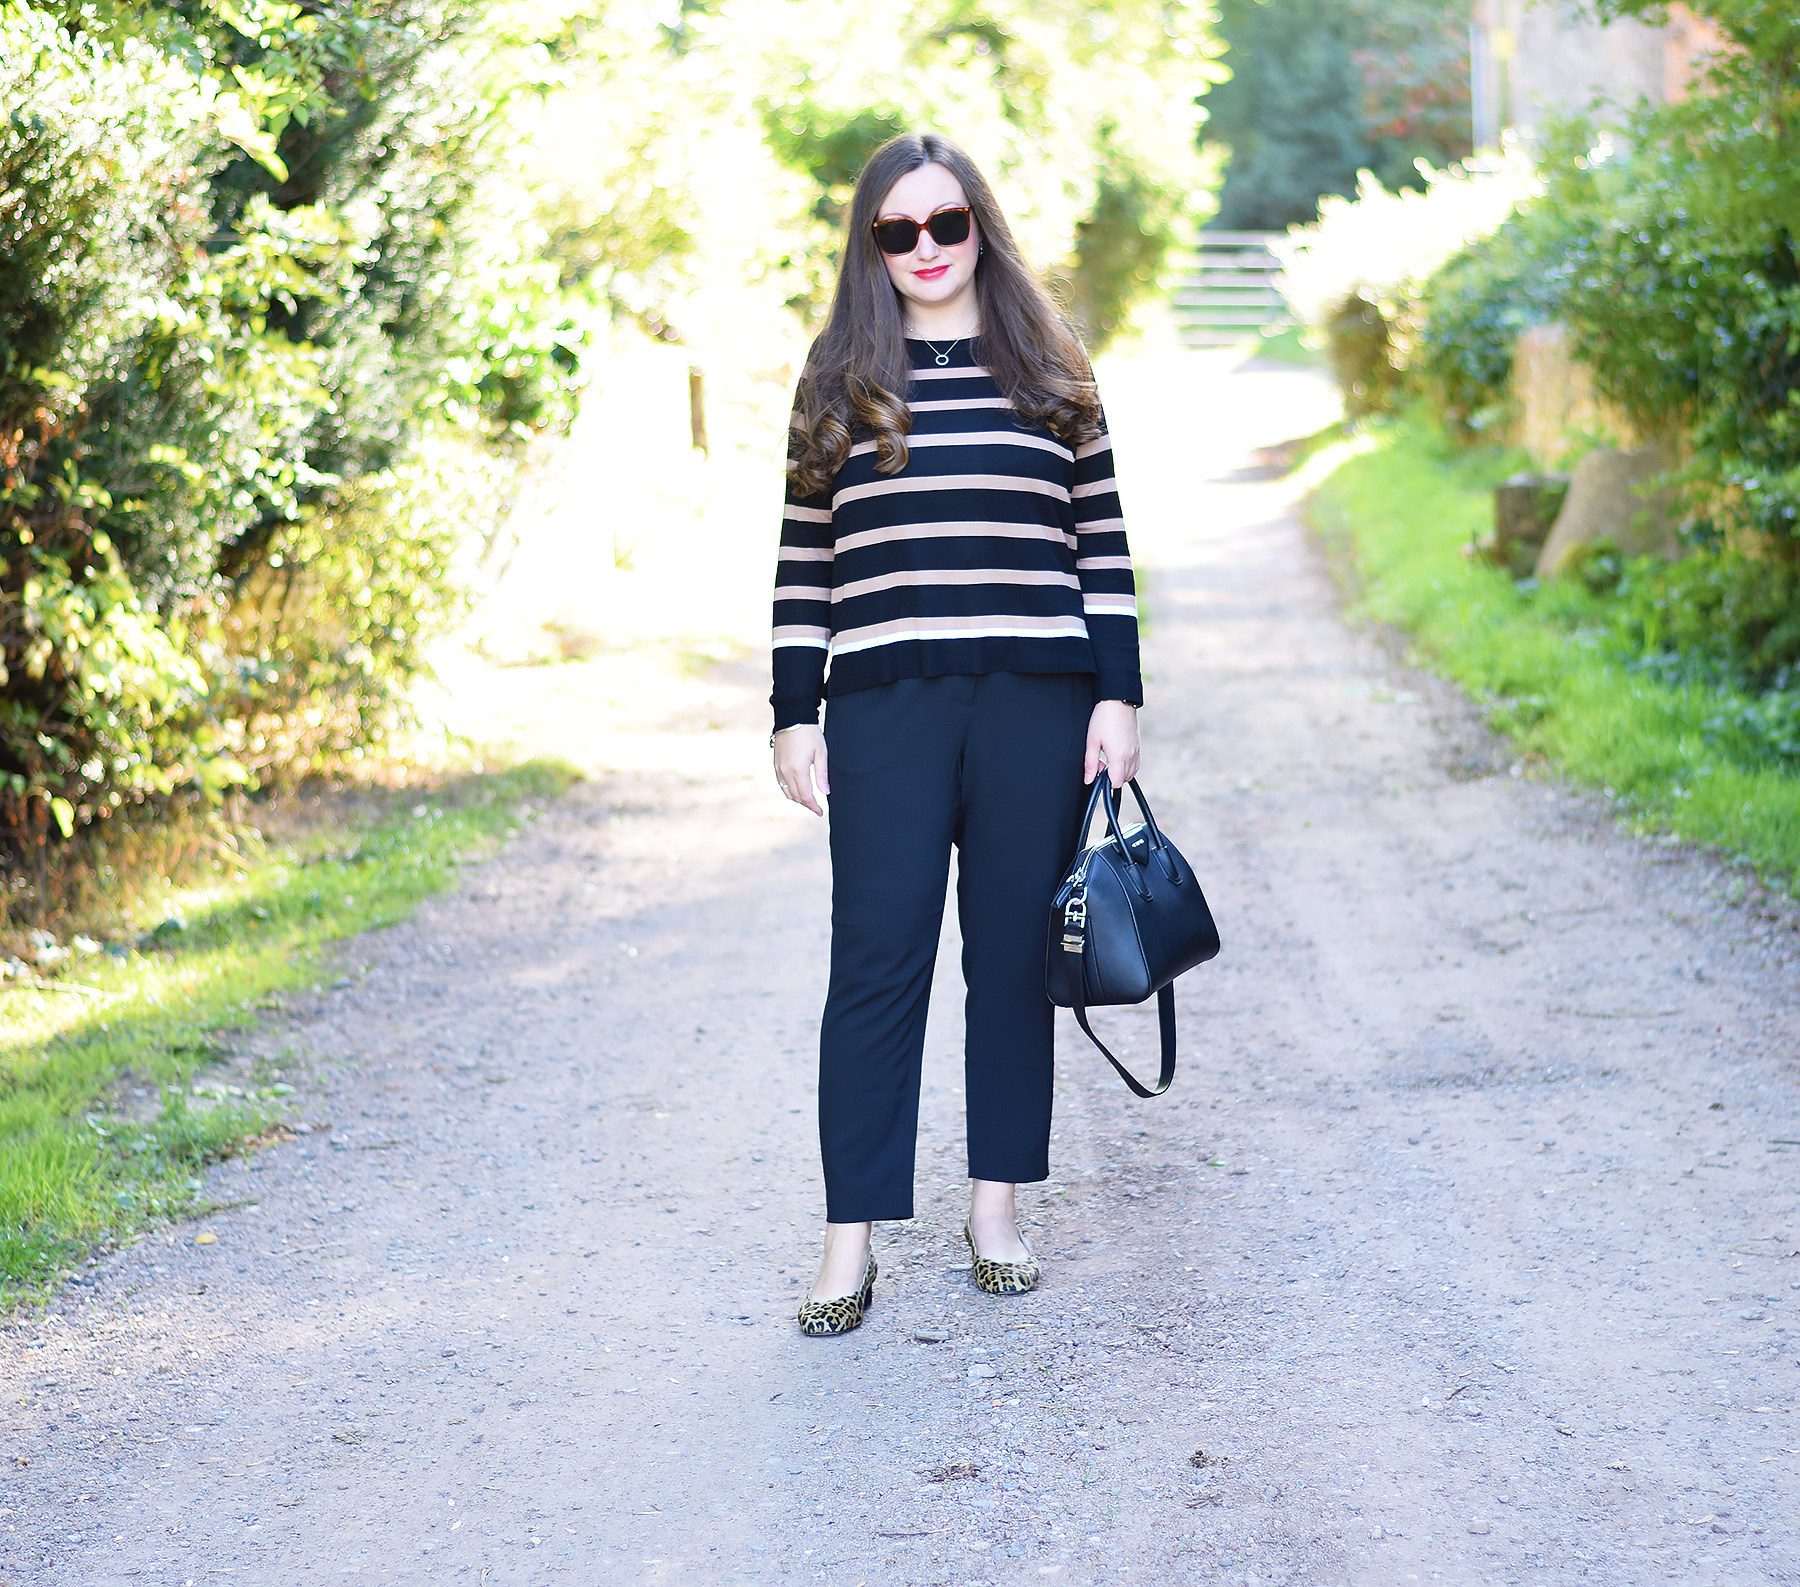 Zara camel and black striped jumper outfit